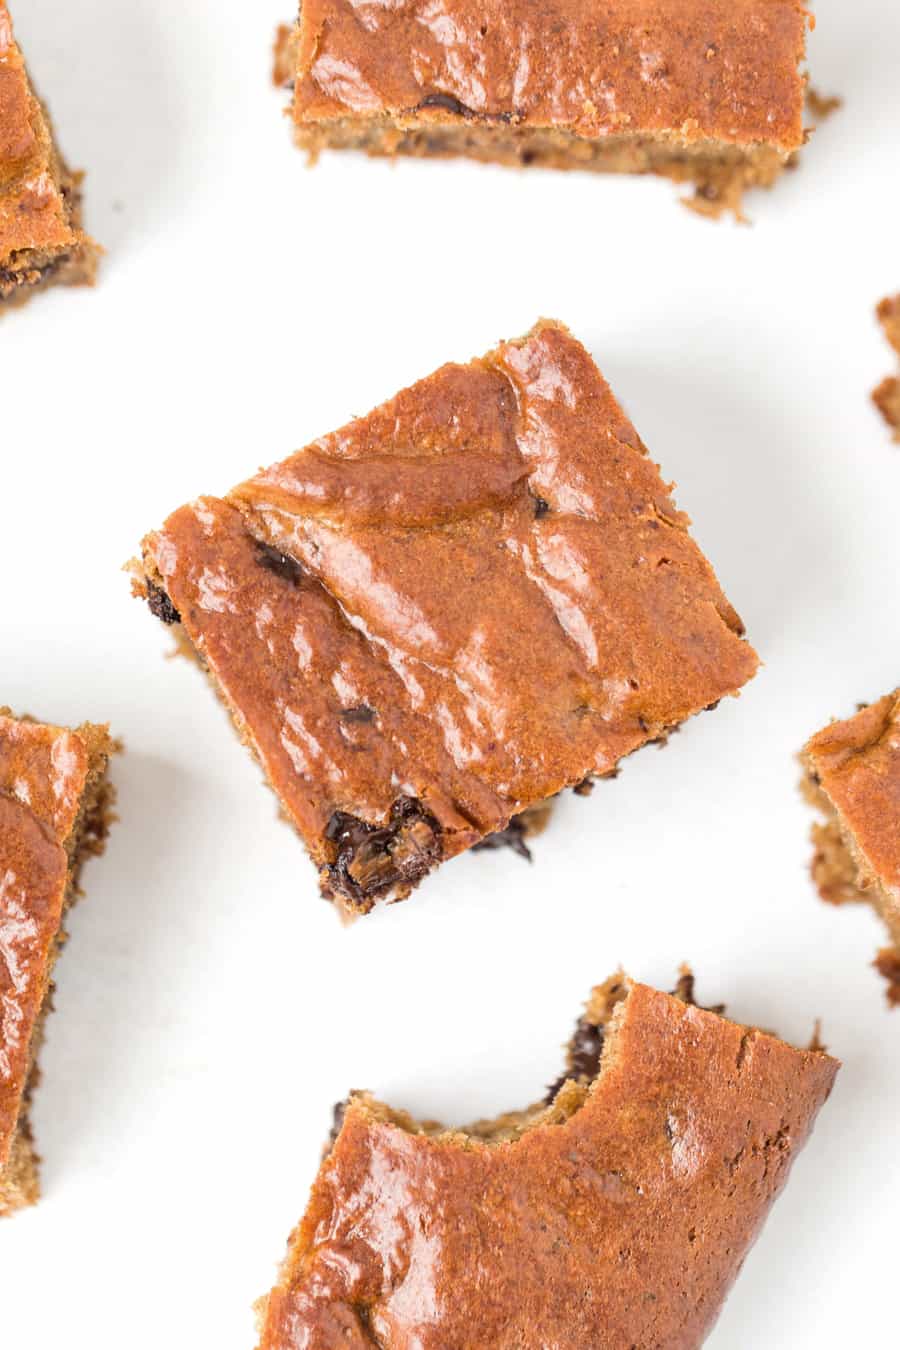 These FLOURLESS Peanut Butter Chocolate Chip Bars are made in just one bowl, with 8 ingredients! [gluten-free + refined sugar-free]